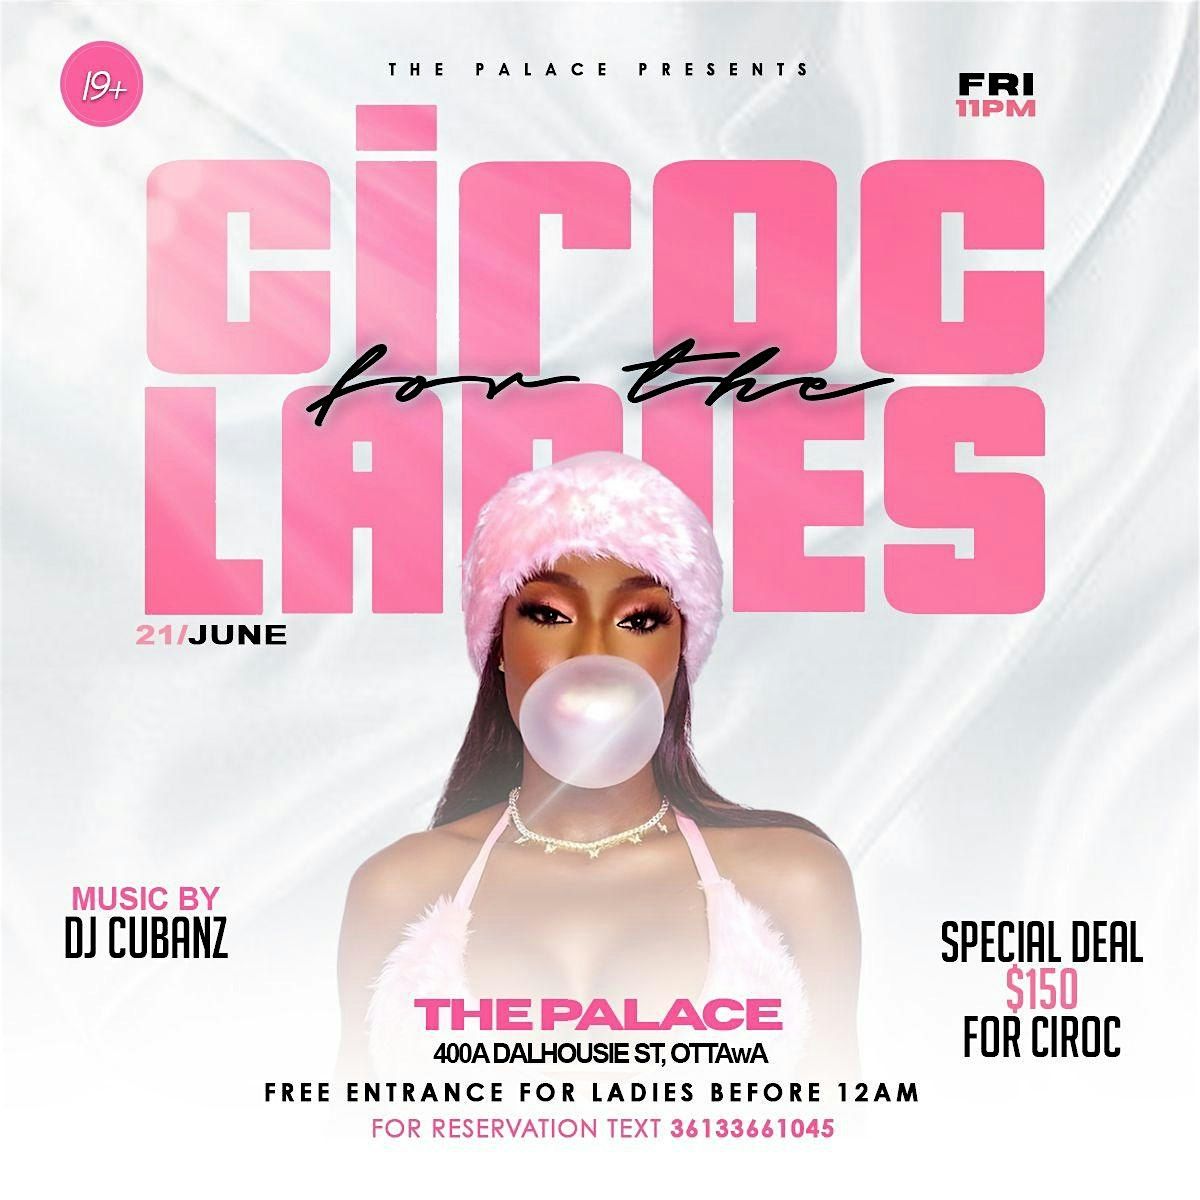 CIROC FOR THE LADIES FREE FOR LADIES BEFORE MIDNIGHT